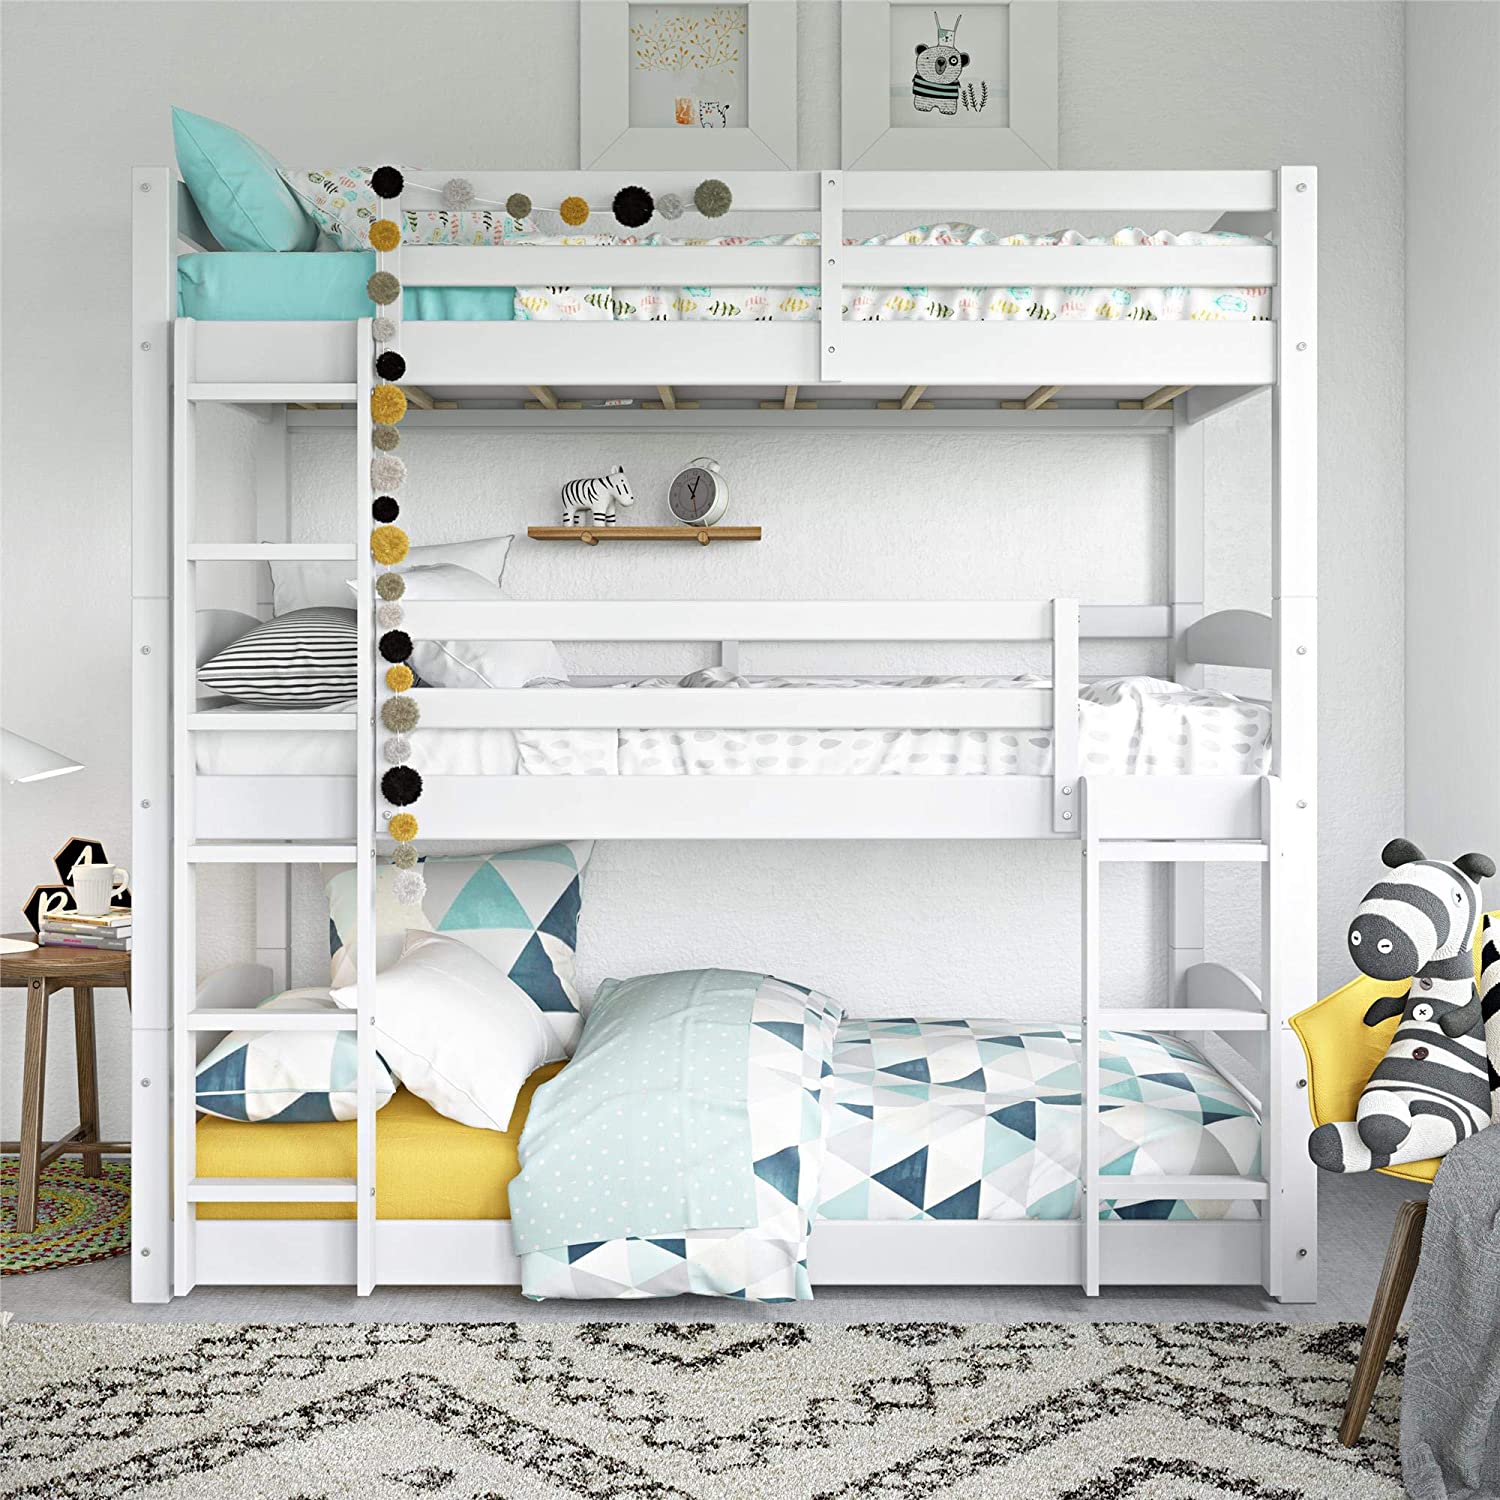 26 Bunk Beds You Ll Want For Yourself, Beautiful Bunk Beds